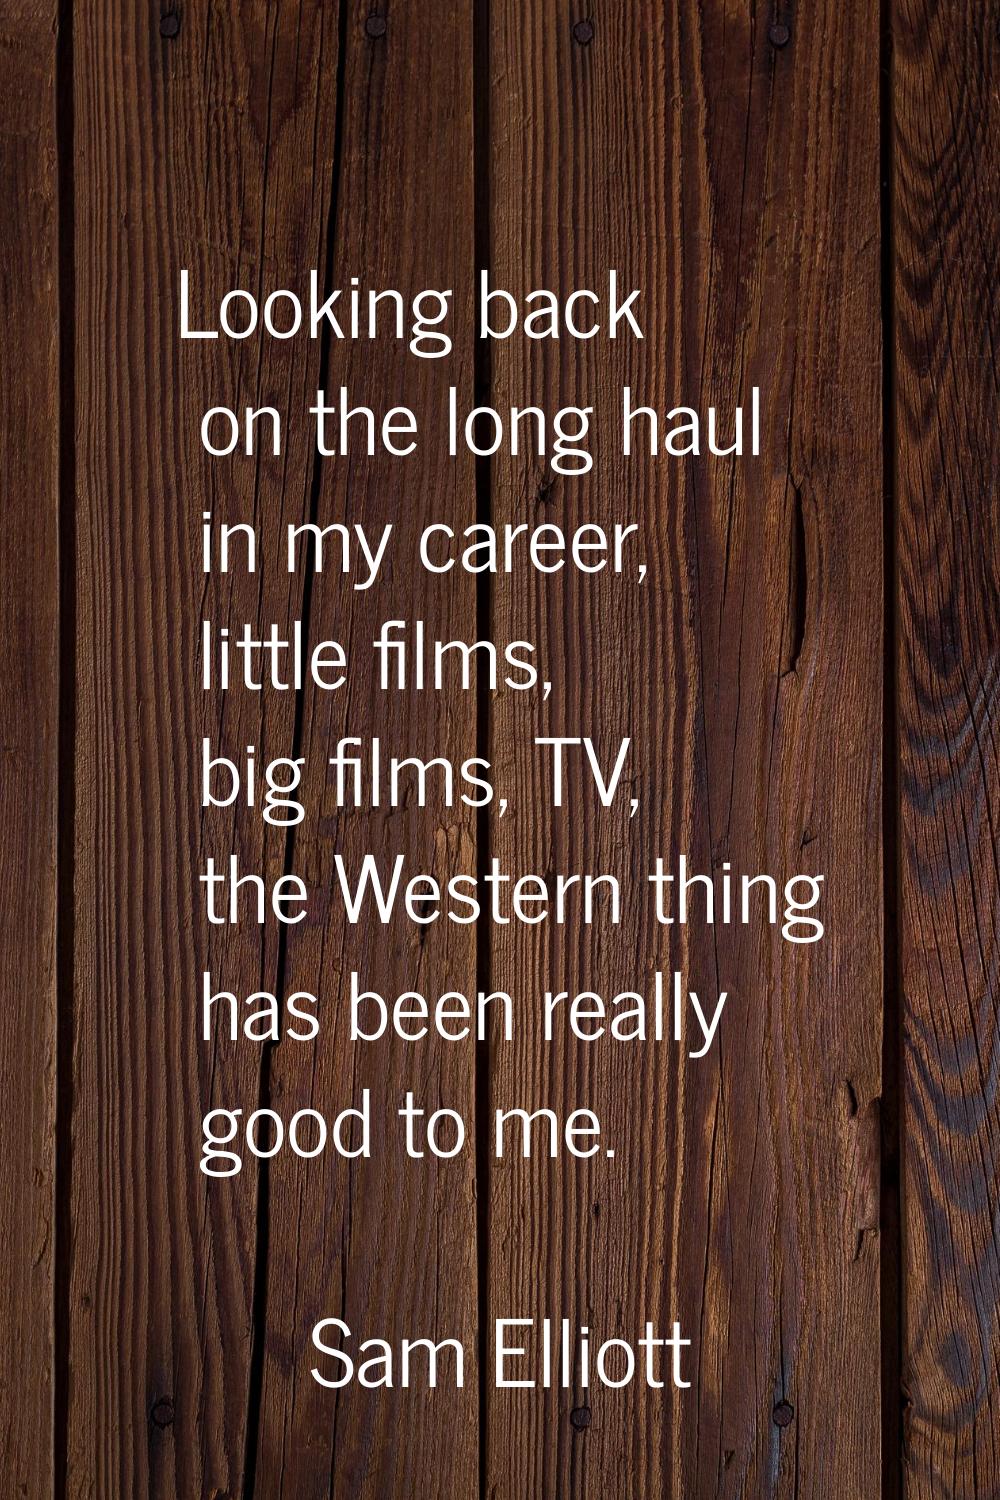 Looking back on the long haul in my career, little films, big films, TV, the Western thing has been